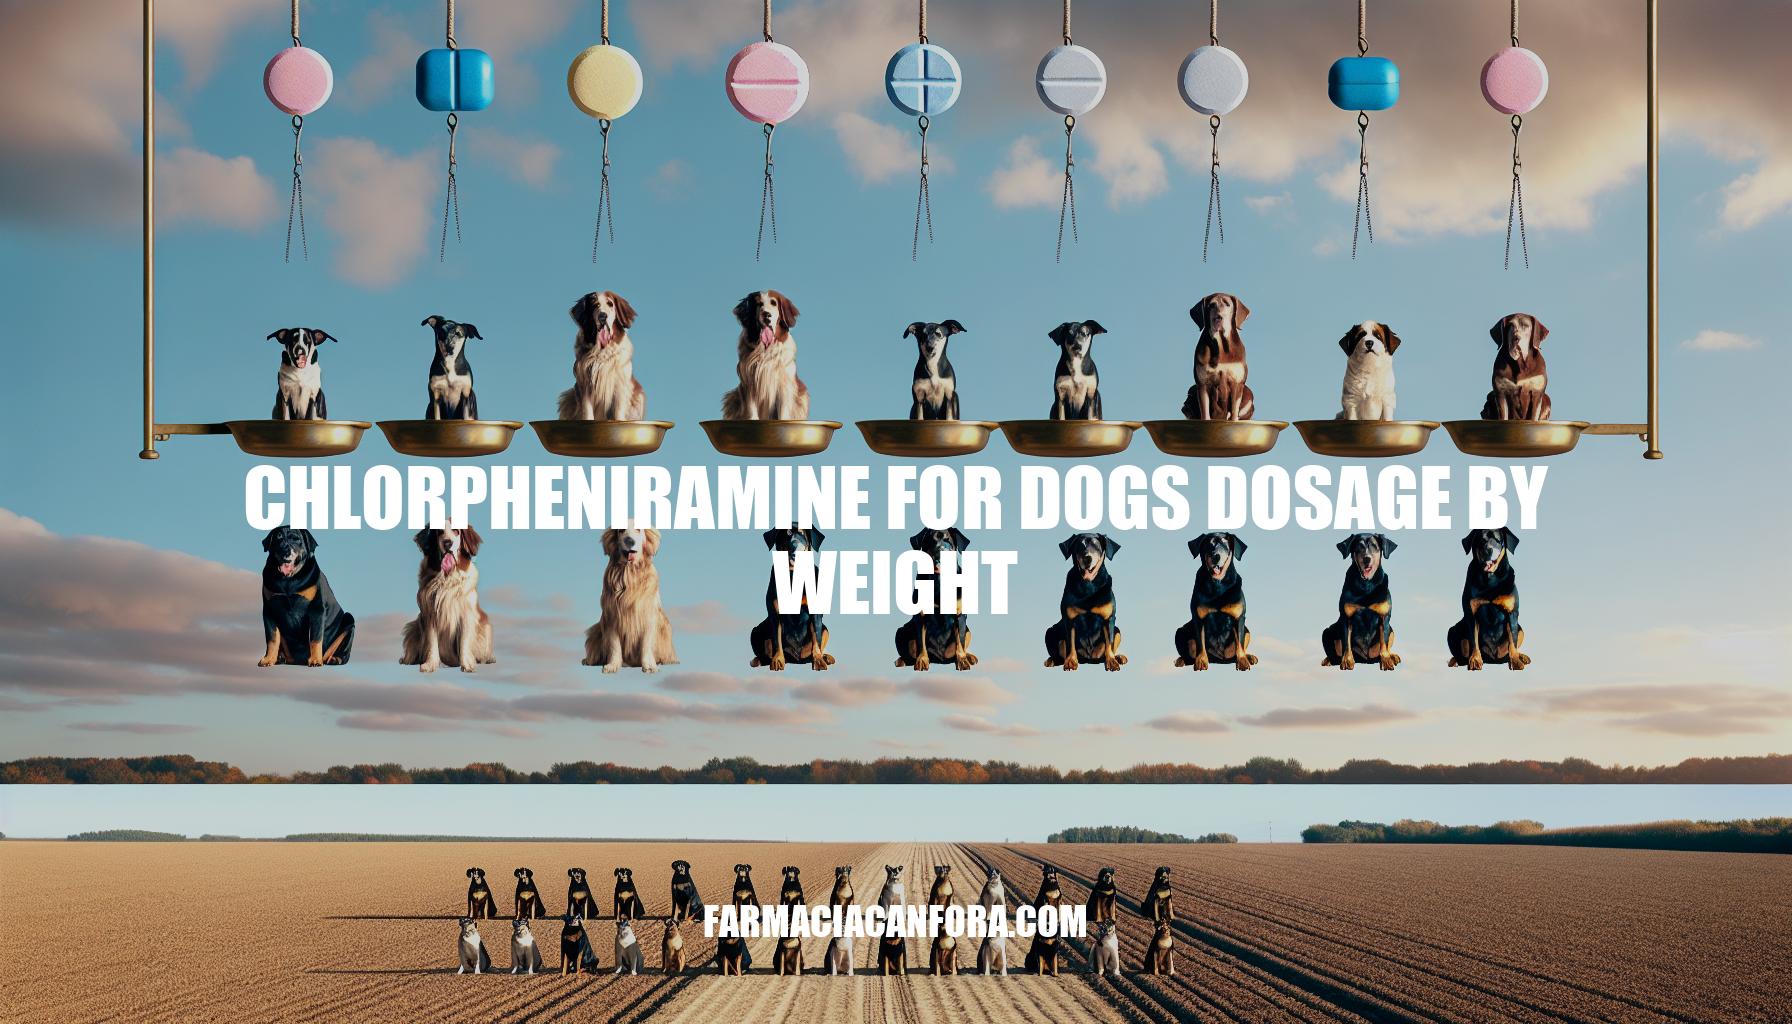 Chlorpheniramine for Dogs Dosage by Weight Guide